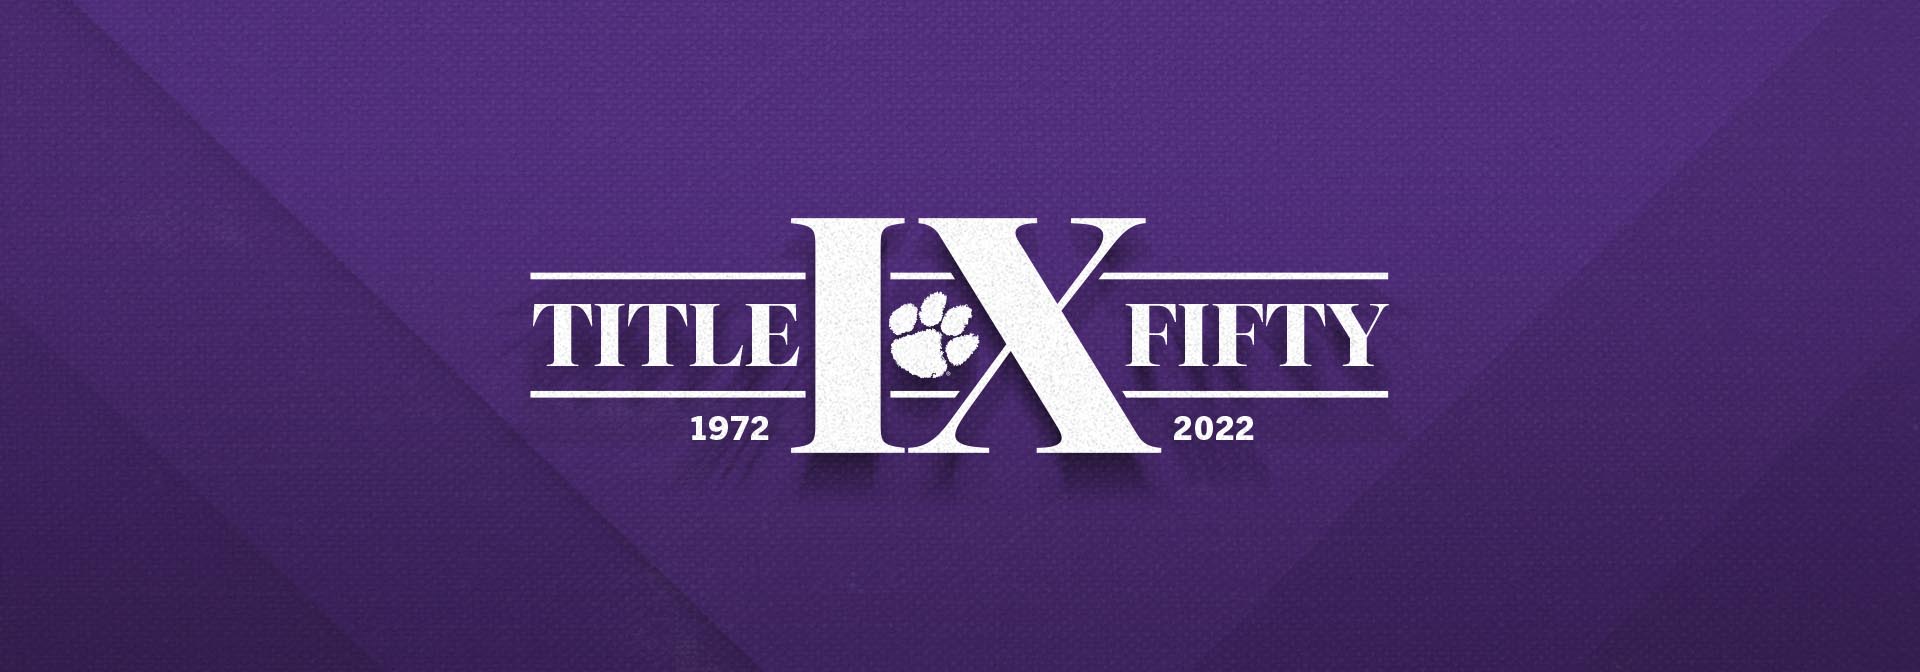 Title IX Fiftieth Anniversary Graphic showing the dates 1972-2022